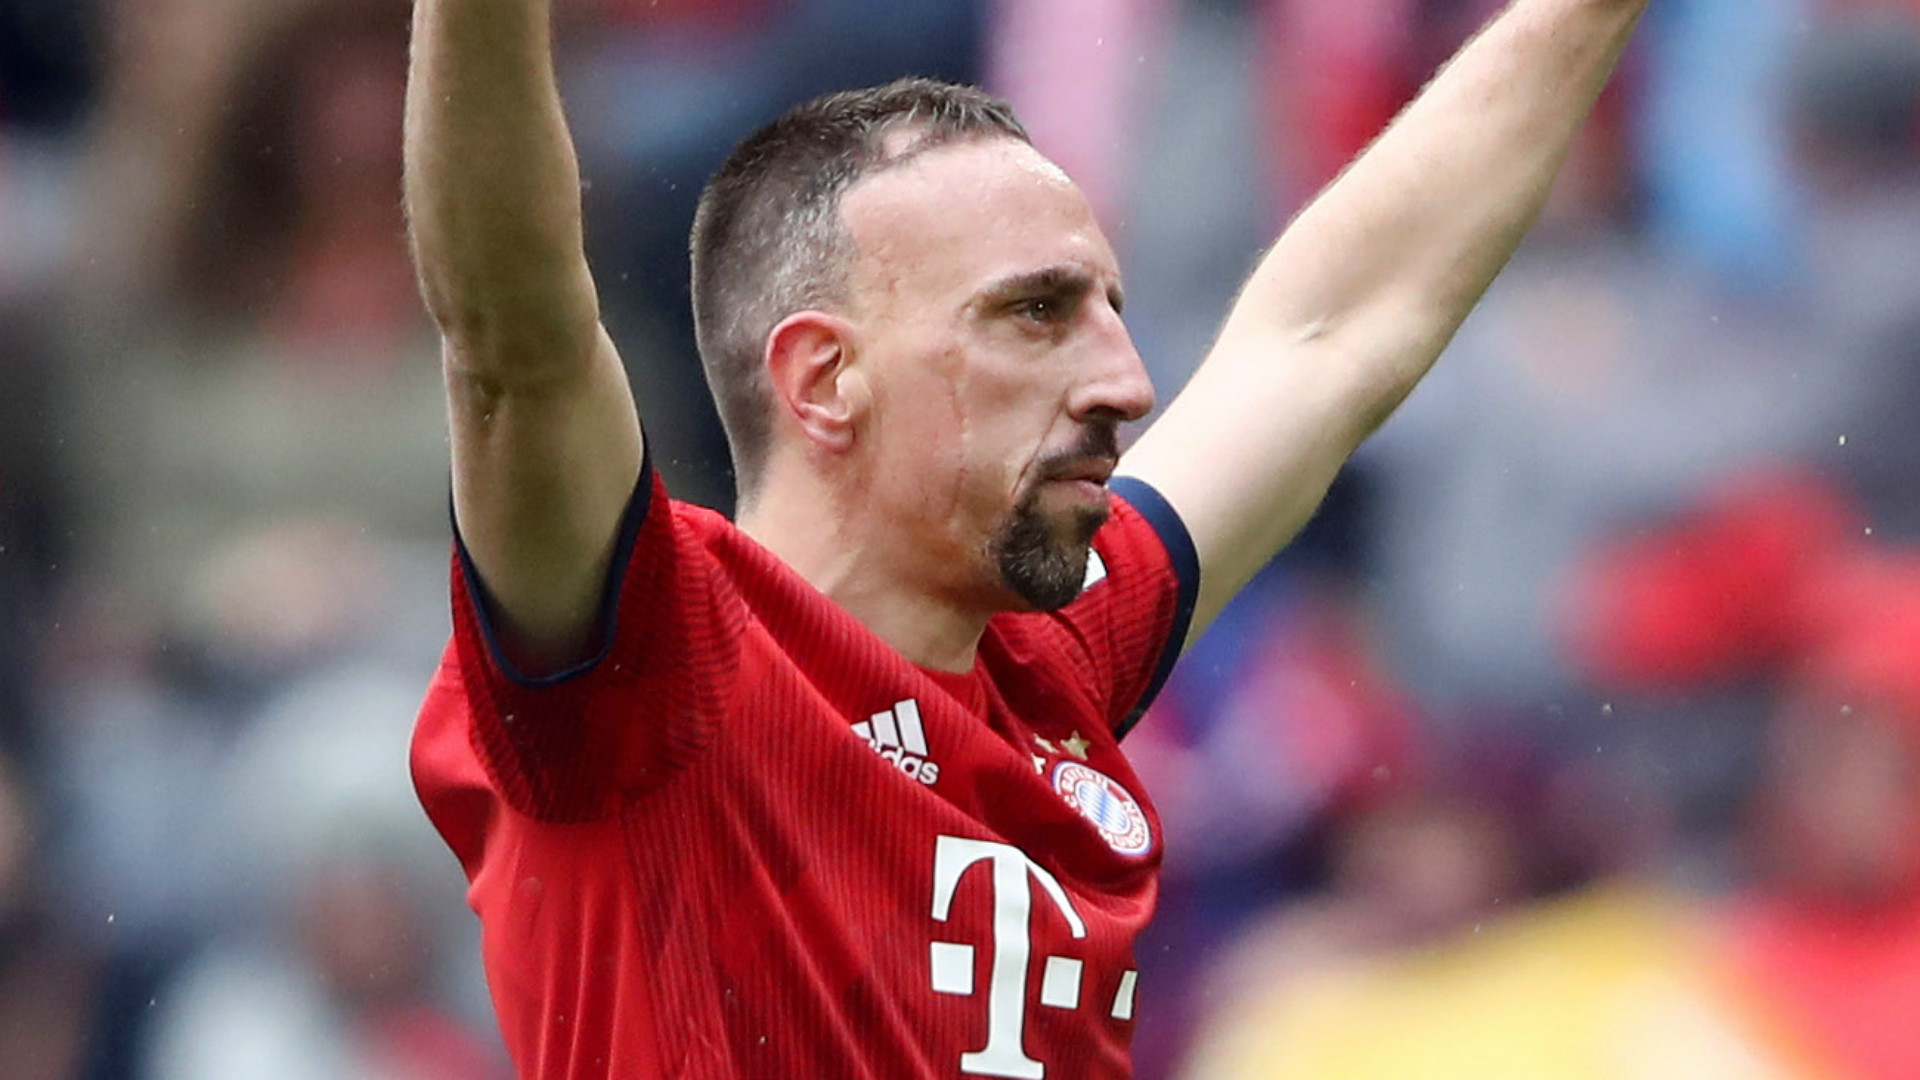 Frank Ribery Retires: The Bayern Munich legend Frank Ribery announces retirement at 39 - Check out